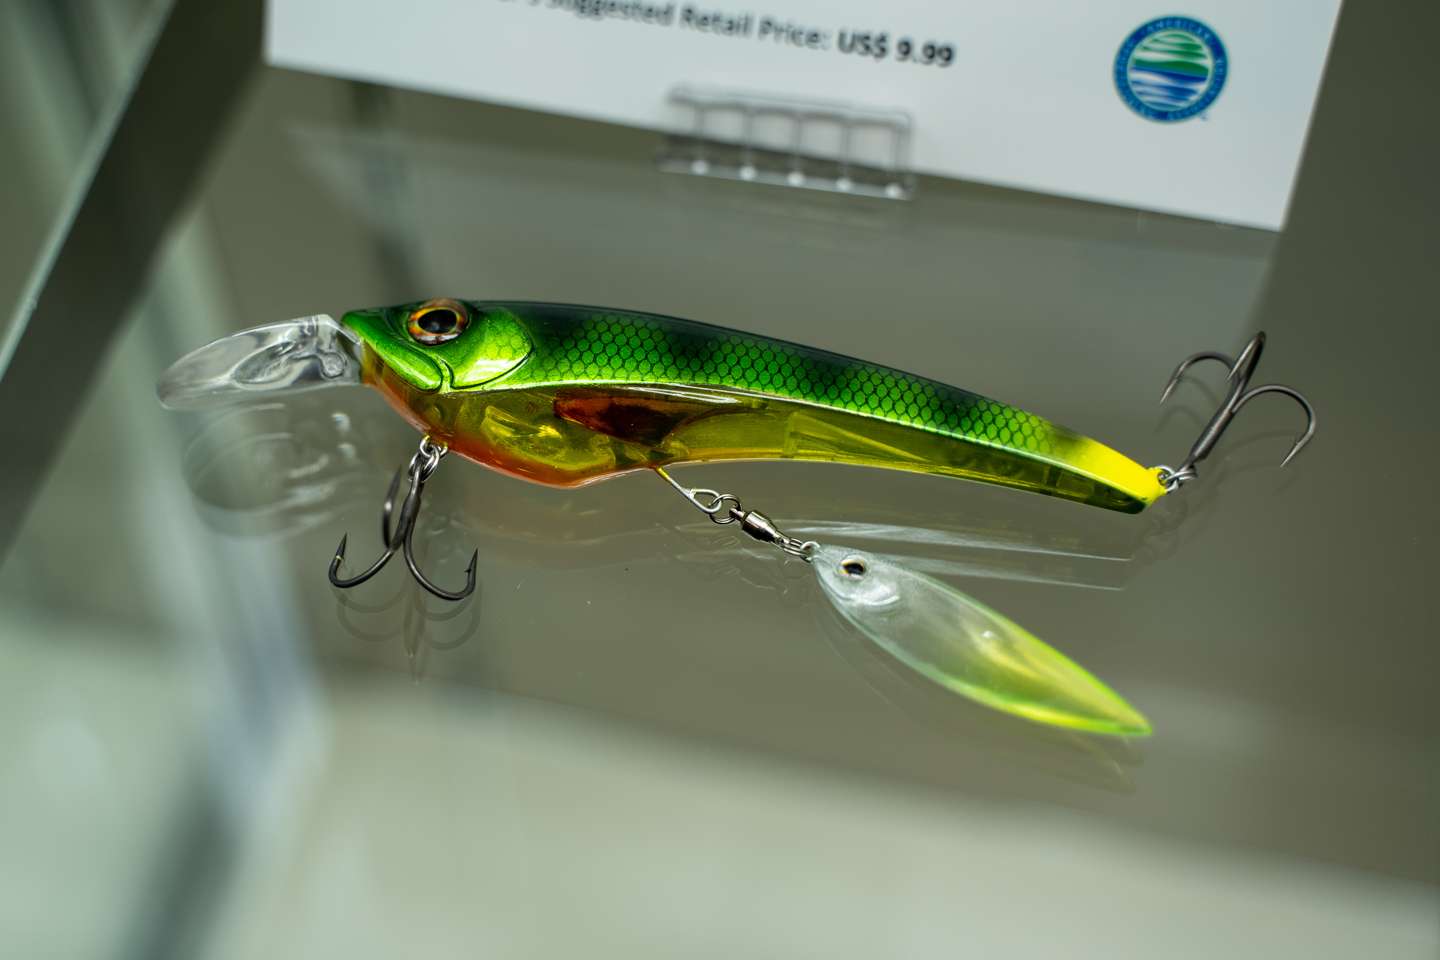 <b>Lunkerhunt Boshi Blade</b><br> Rigged with two trebles and a spinner attached. 